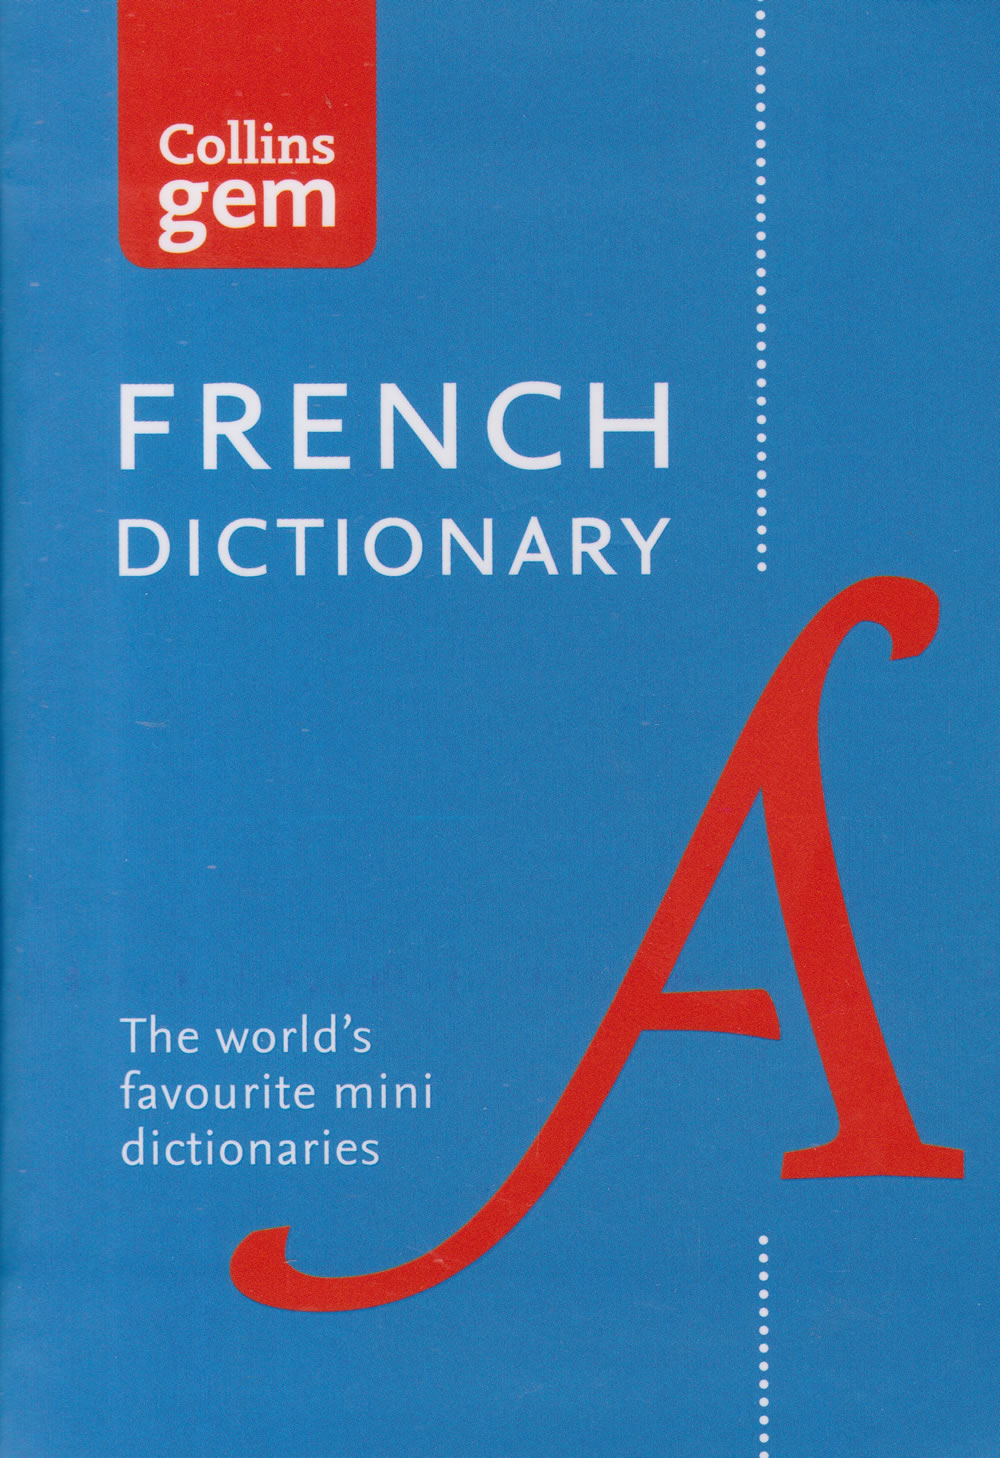 Text　Collins　Dictionary　Book　Gem　French　Centre